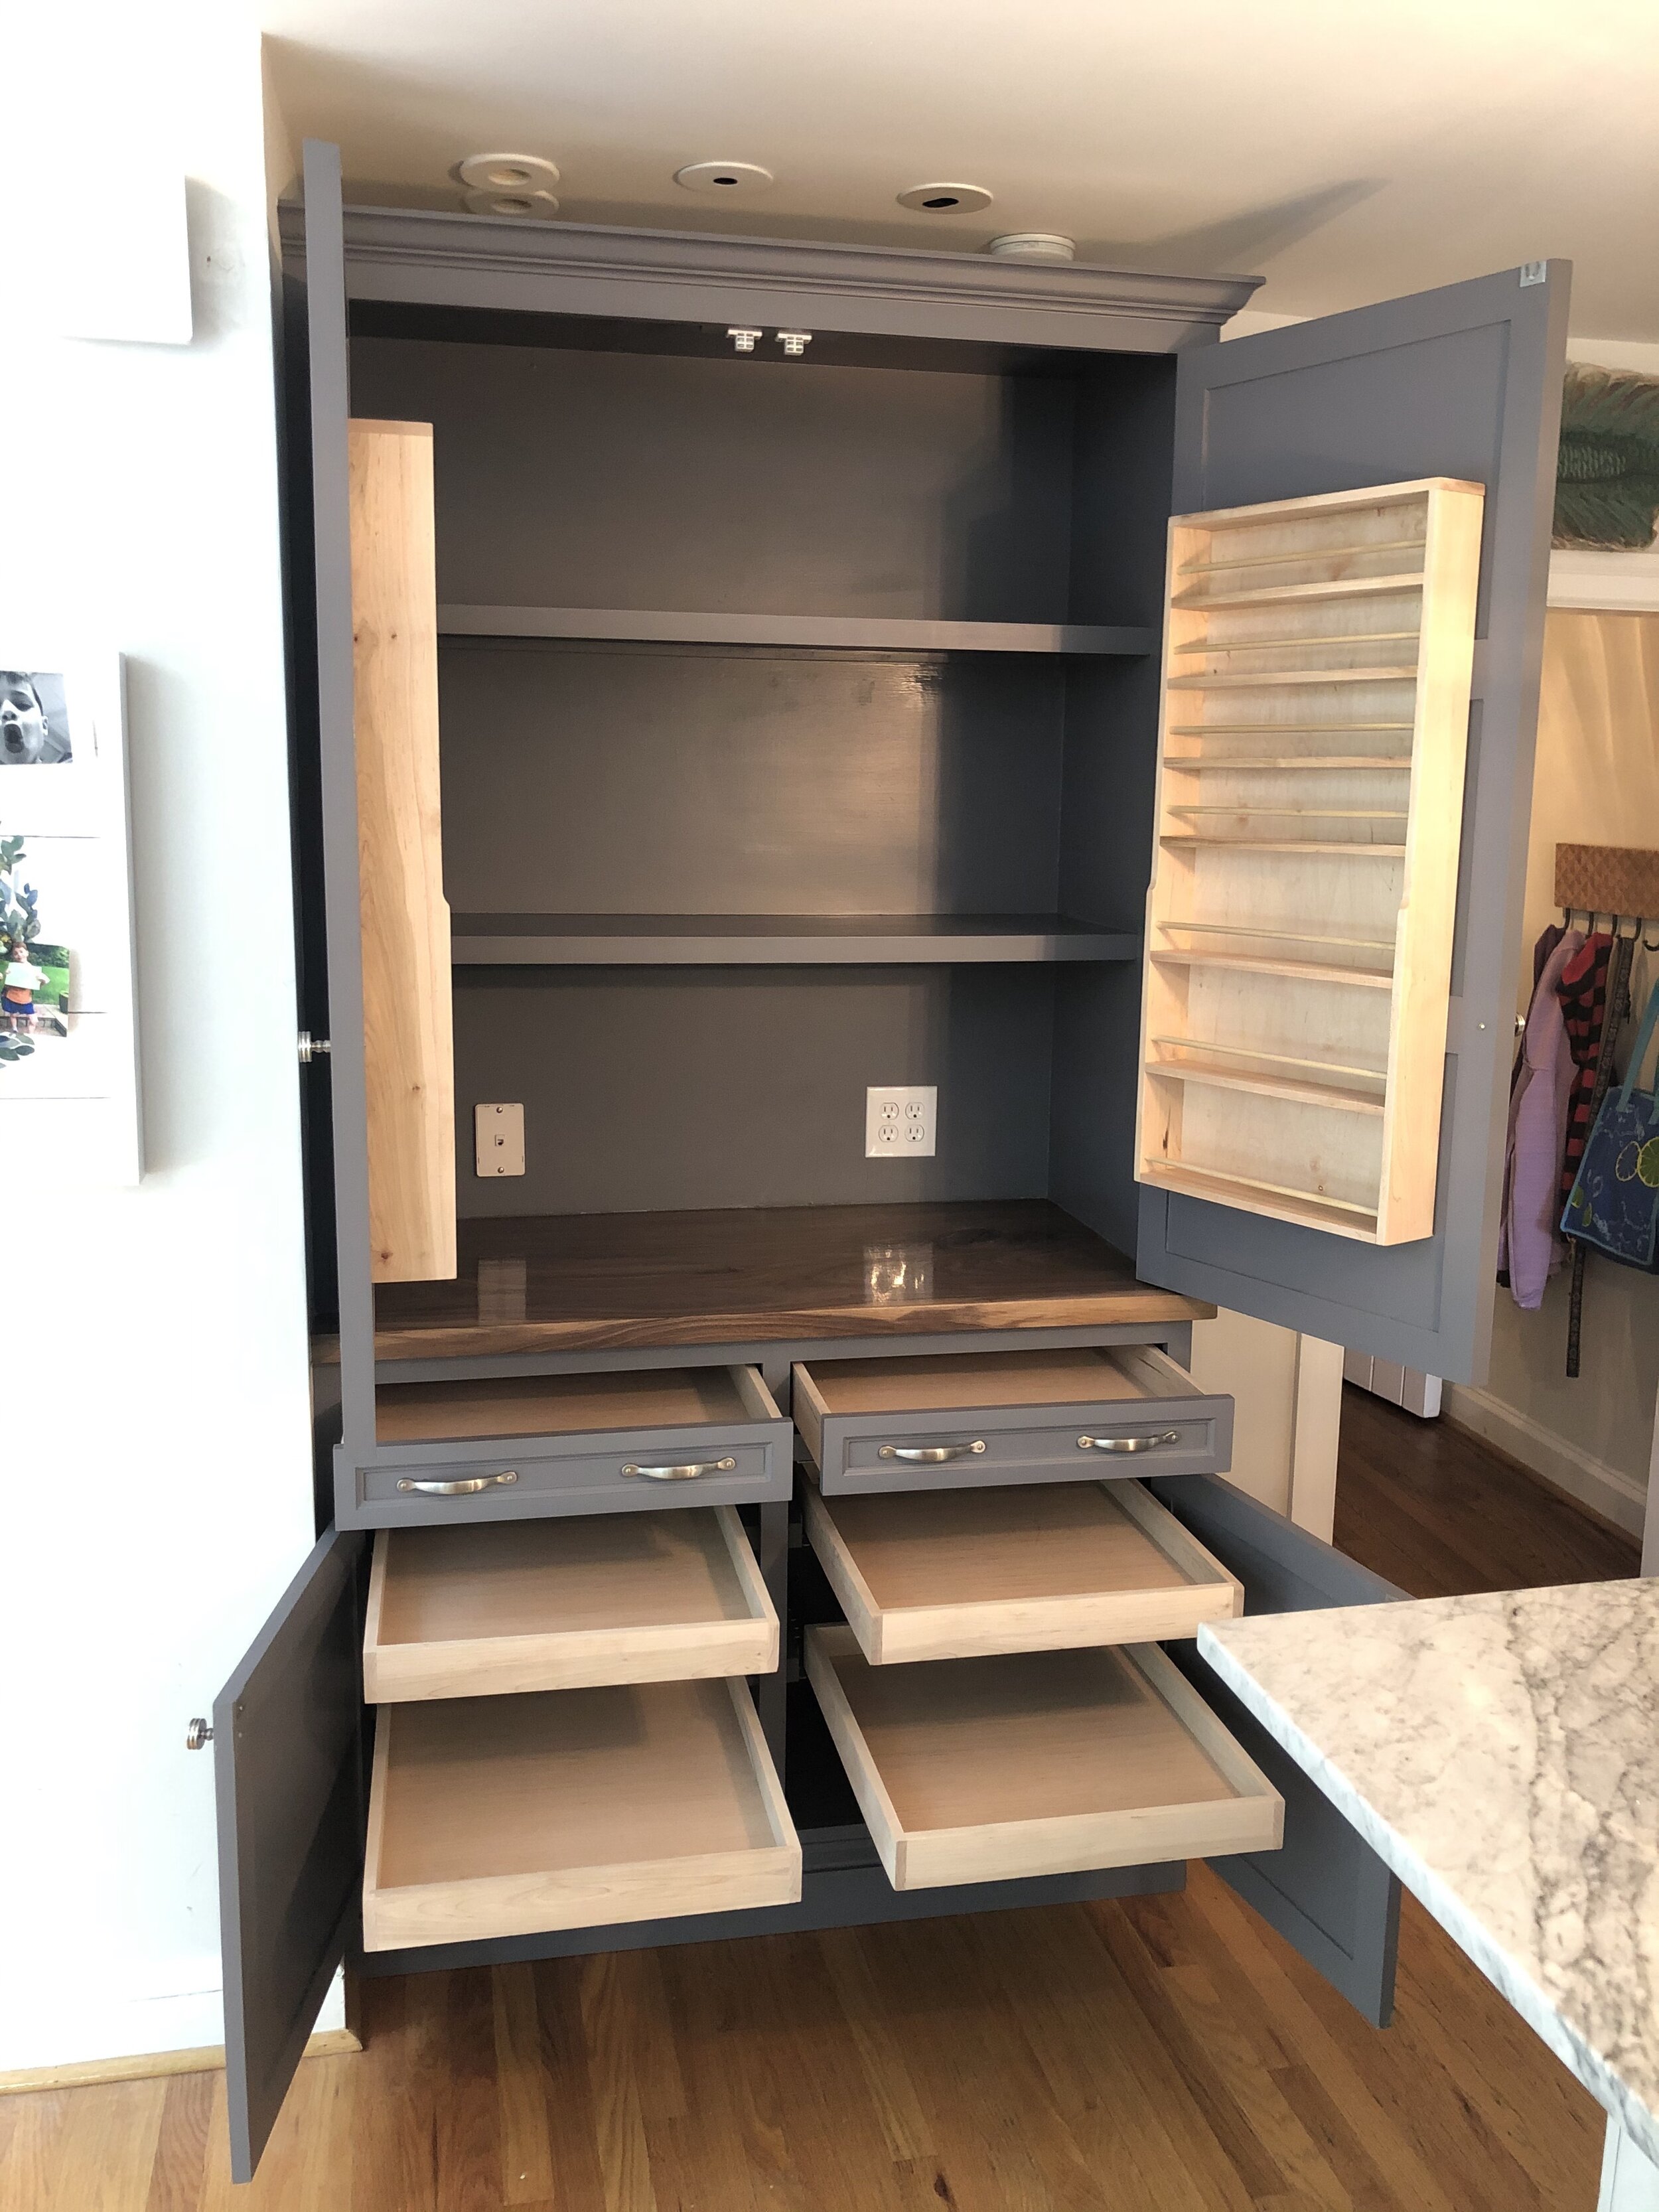  The lower cabinet has two standard drawers and four pull-out shelves. The upper cabinet sits atop a solid black walnut countertop and has several shelves for additional storage and spice racks attached to each door.  